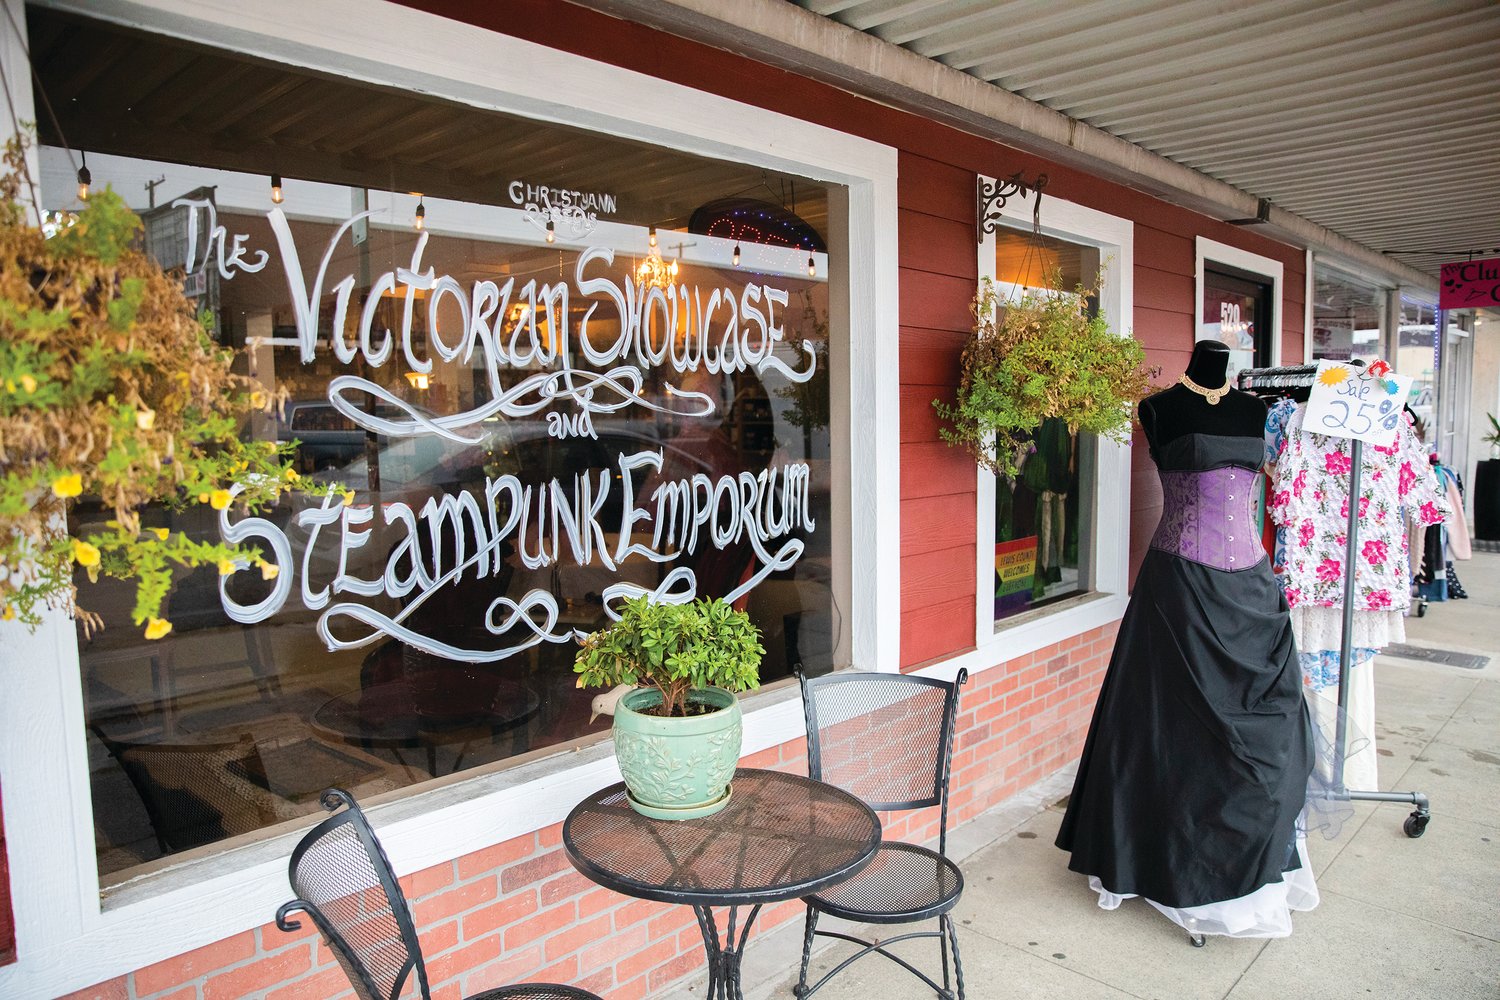 The Victorian Showcase and Steampunk Emporium is located at 529 North Tower Avenue in downtown Centralia.